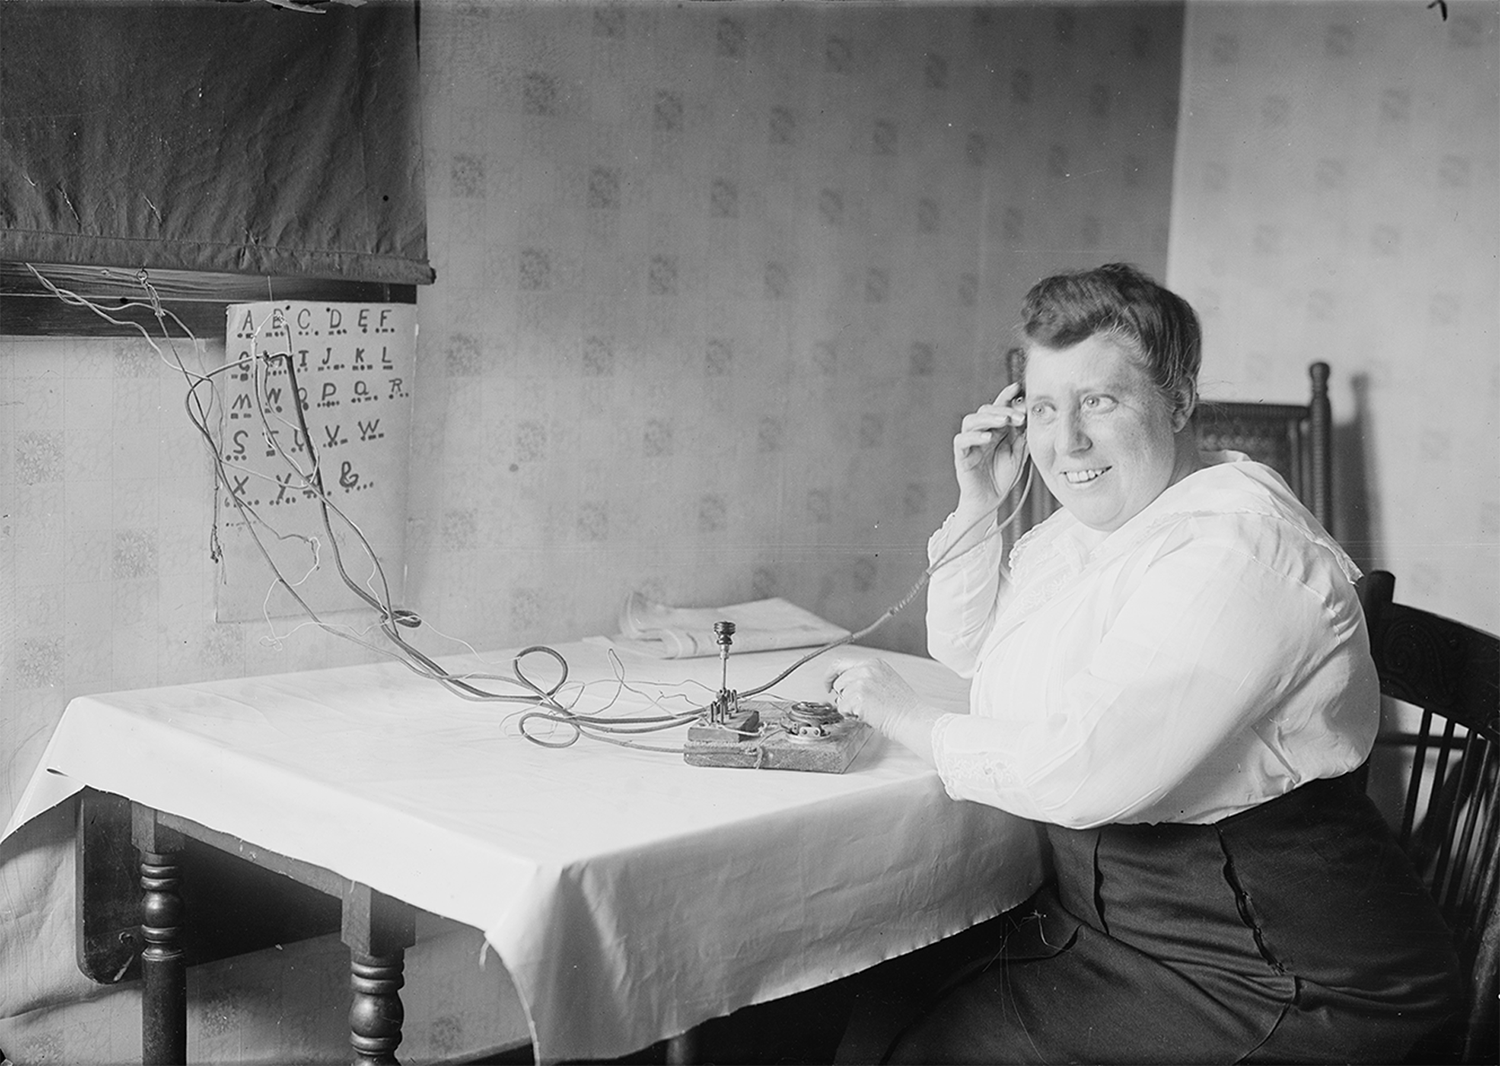 A woman uses a telegraph machine as a talk bubble states in Morse Code, “I wish there was a faster way to communicate.”